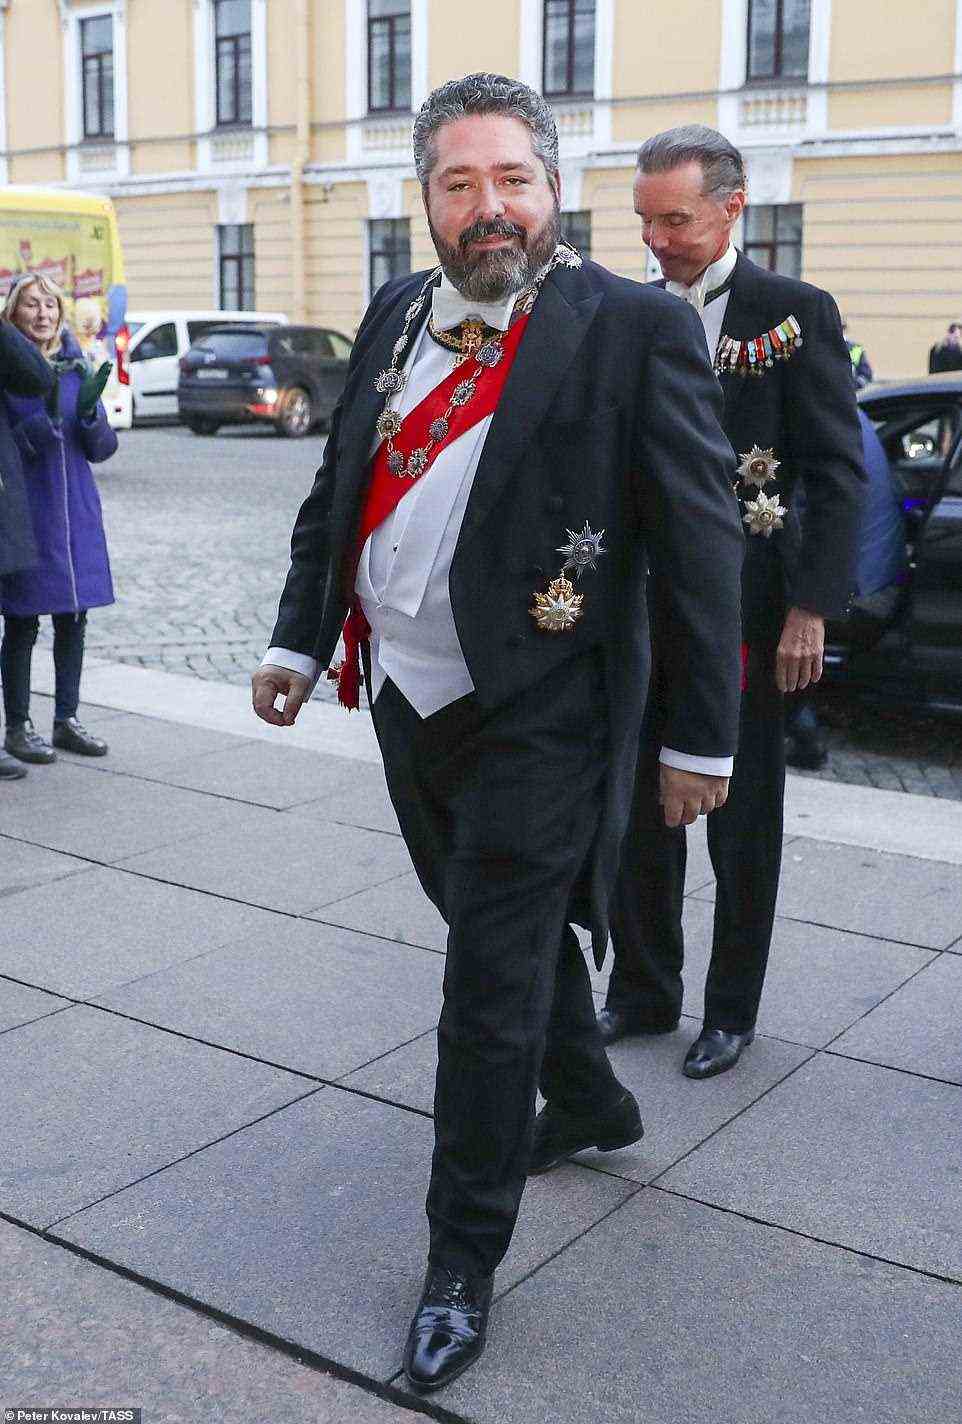 Grand Duke George Mikhailovich of Russia, a descendant of the Romanov dynasty, is seen prior to a reception at the Russian Museum of Ethnography marking his wedding